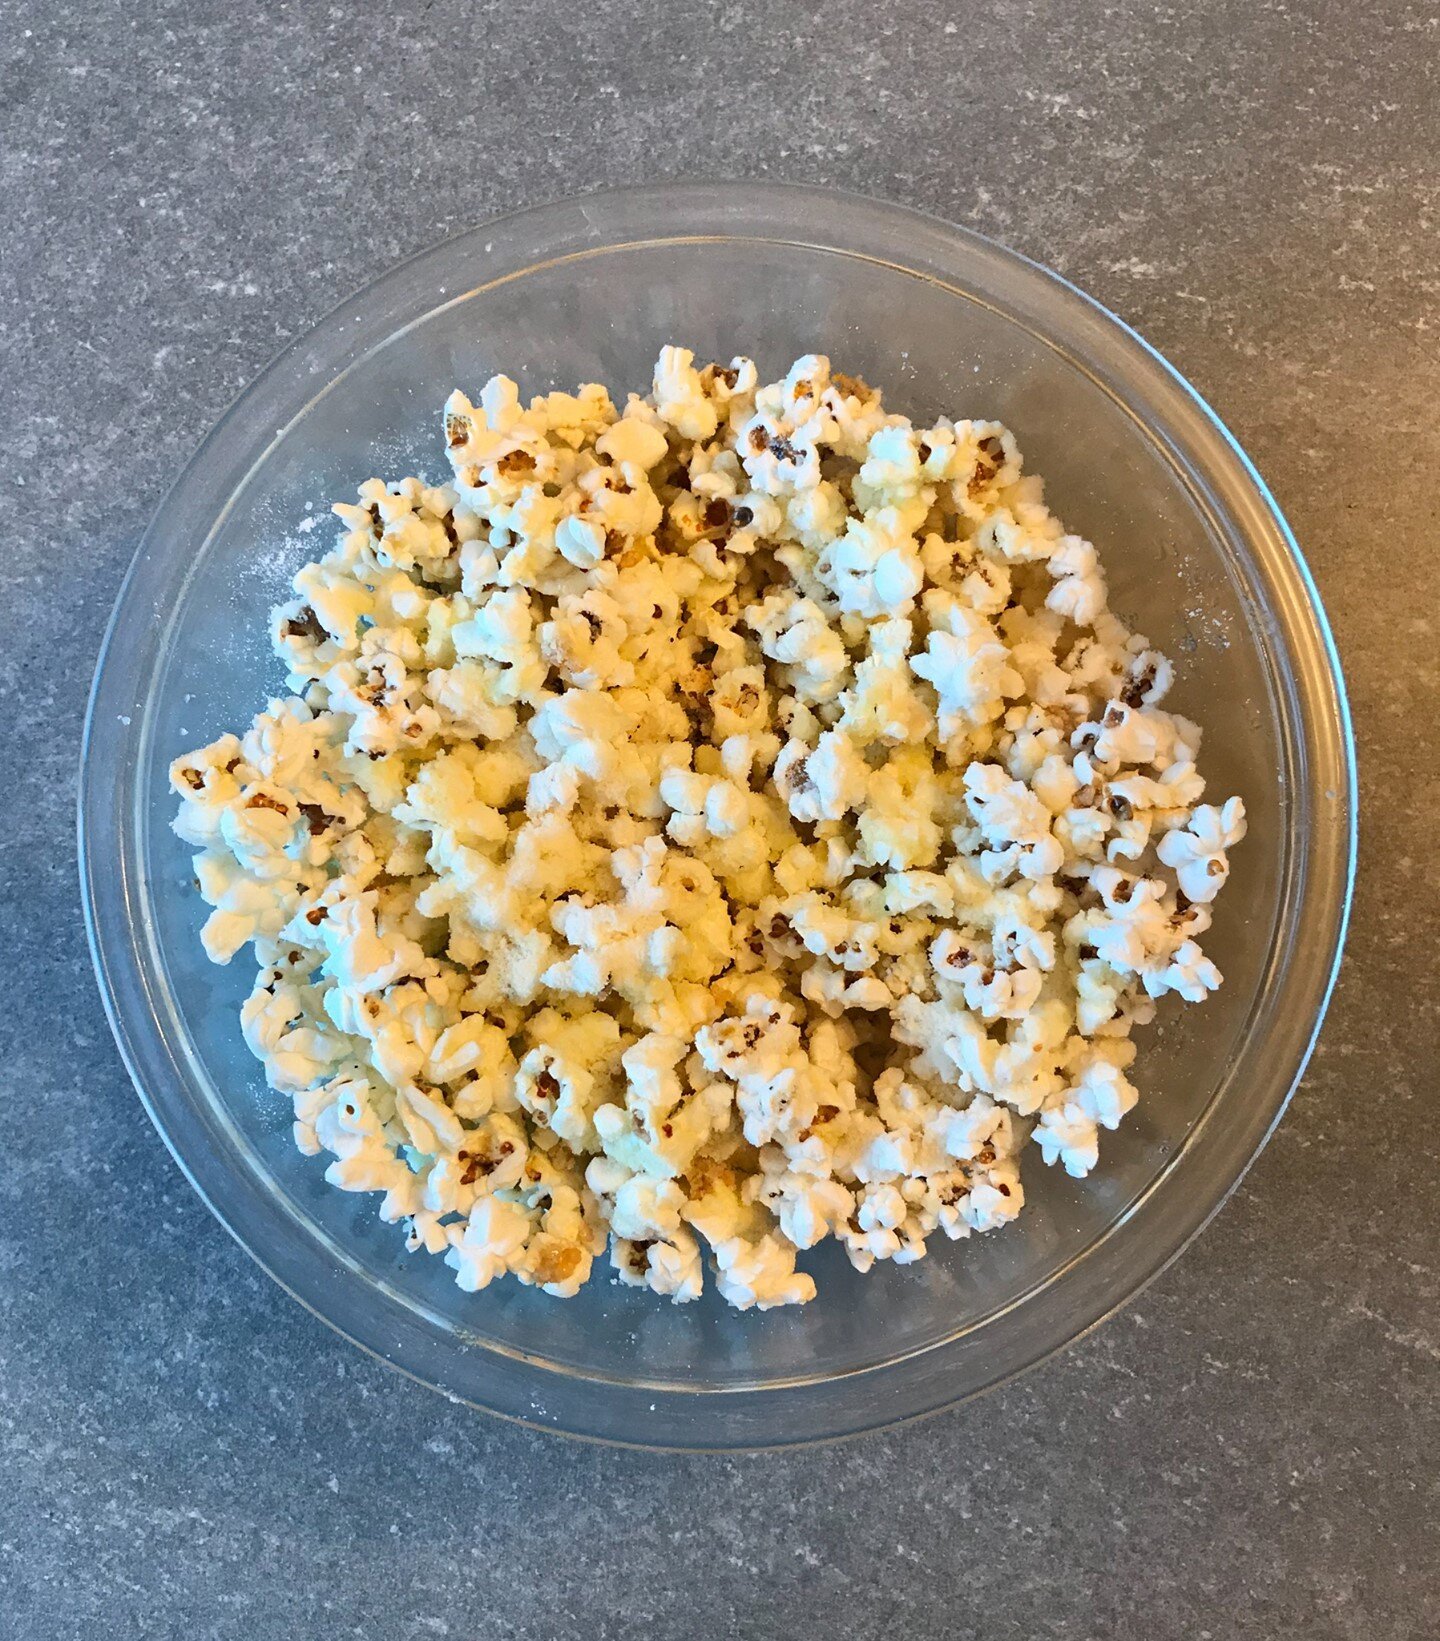 Italian Popcorn!
*
Perfect for a rainy movie night at home or go ahead and sneak it into the theatre, we won't tell!
*
Check out the recipes link in the link tree. 
*
*
#bellview #bellviewfoods #popcorn #parmcheese #italian #since1930 #movienight #mo